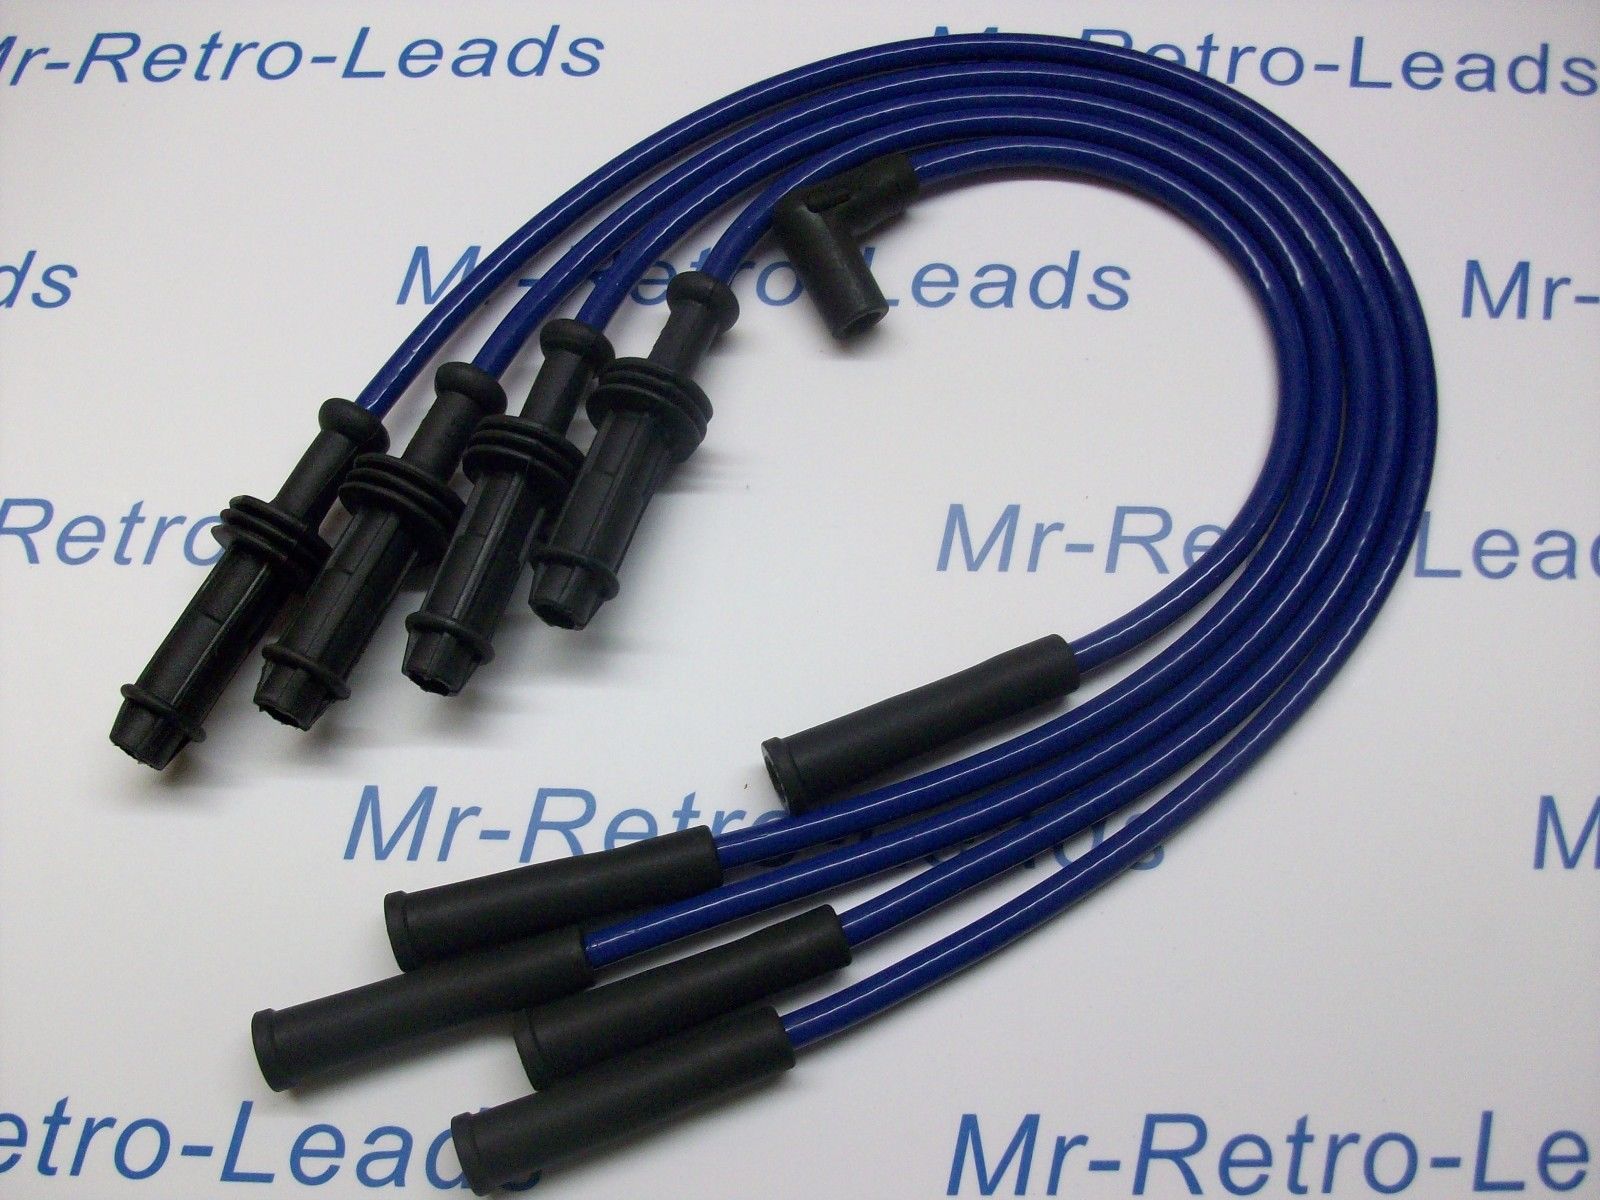 Blue 8.5mm Performance Ignition Leads Will Fit. Citroen Ax C15 Zx Peugot 106 205